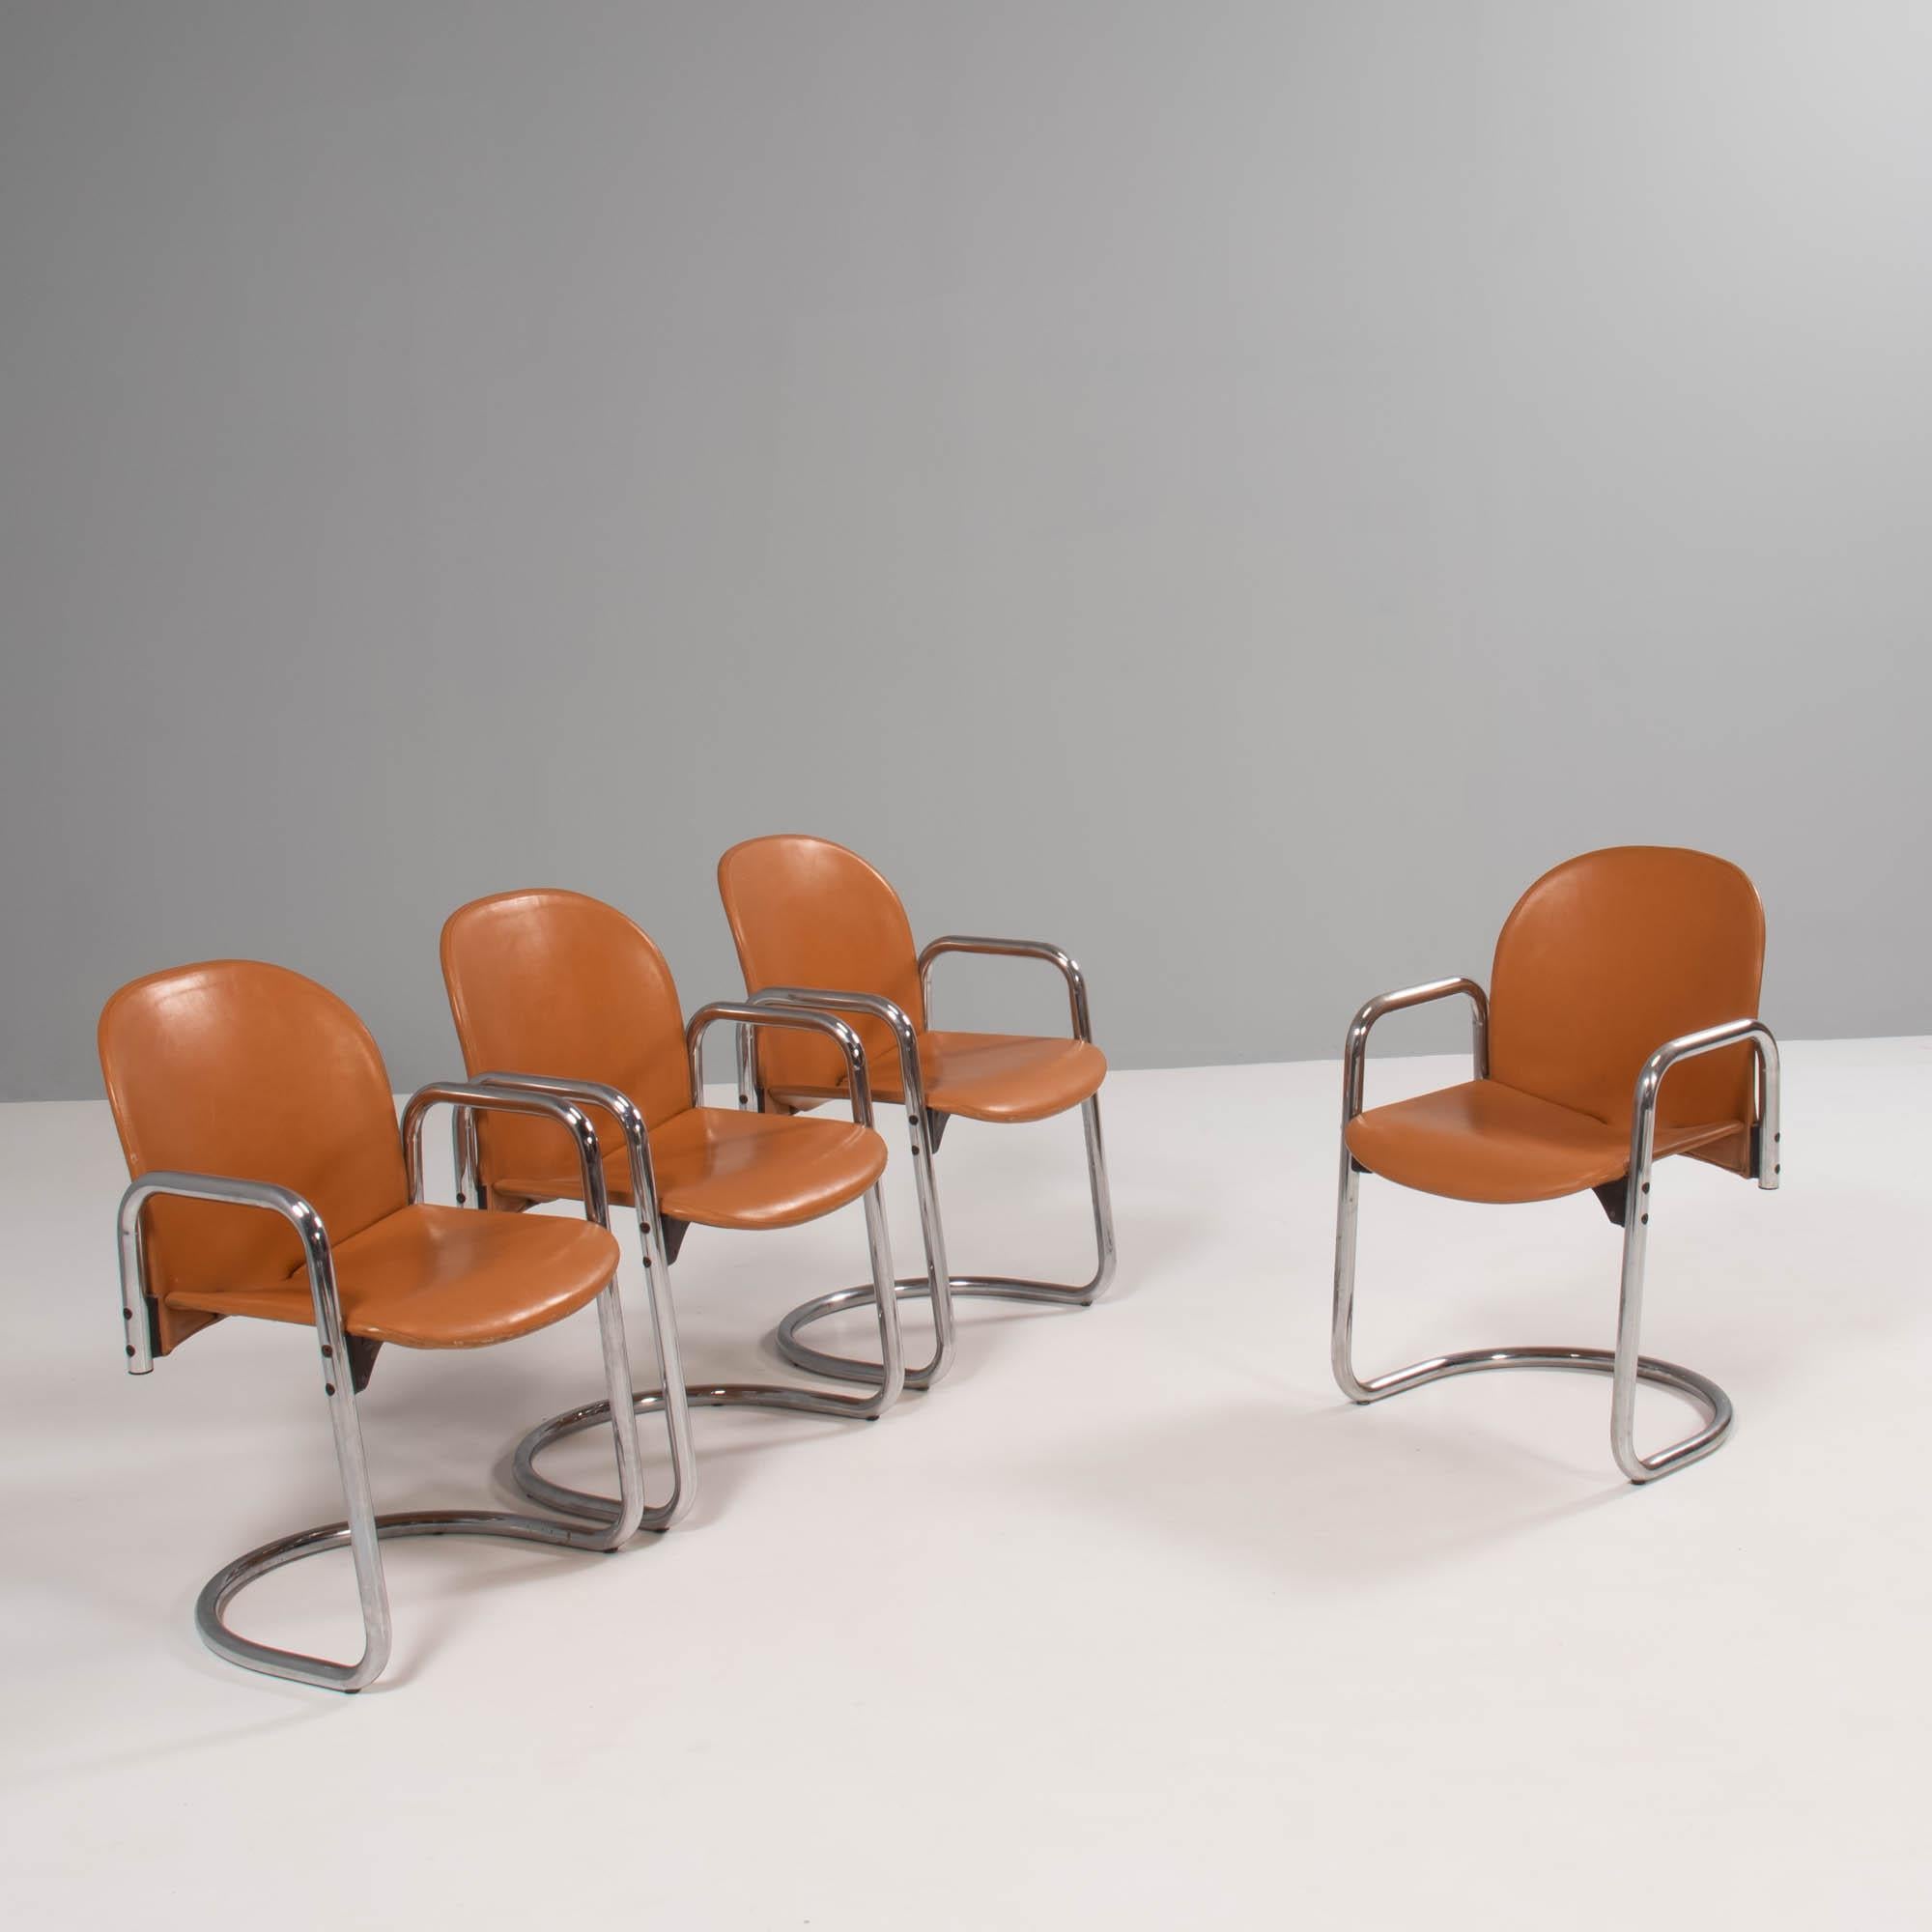 An incredible example of 1970s design, these Dialogo dining chairs were designed by Afra & Tobia Scarpa for B&B Italia in the 1970s.

The chairs give the illusion of being created from a single tubular chrome frame which forms the curved